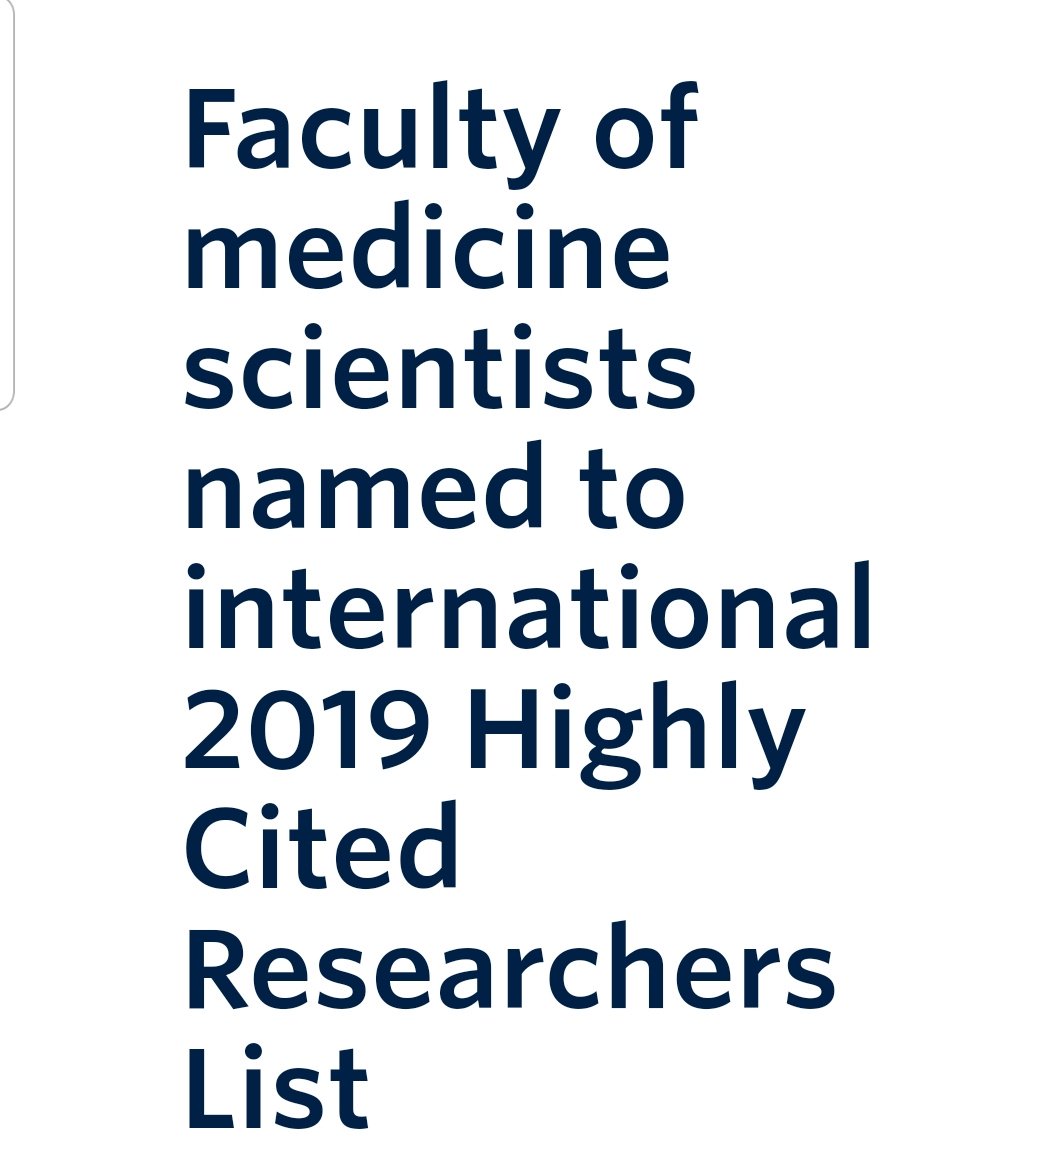 A big congrats to @JonathonLeipsic and @johngraydonwebb on being named to the global highly cited researchers list! @CHVI85209027 @UBC_Radiology @HLIStPauls